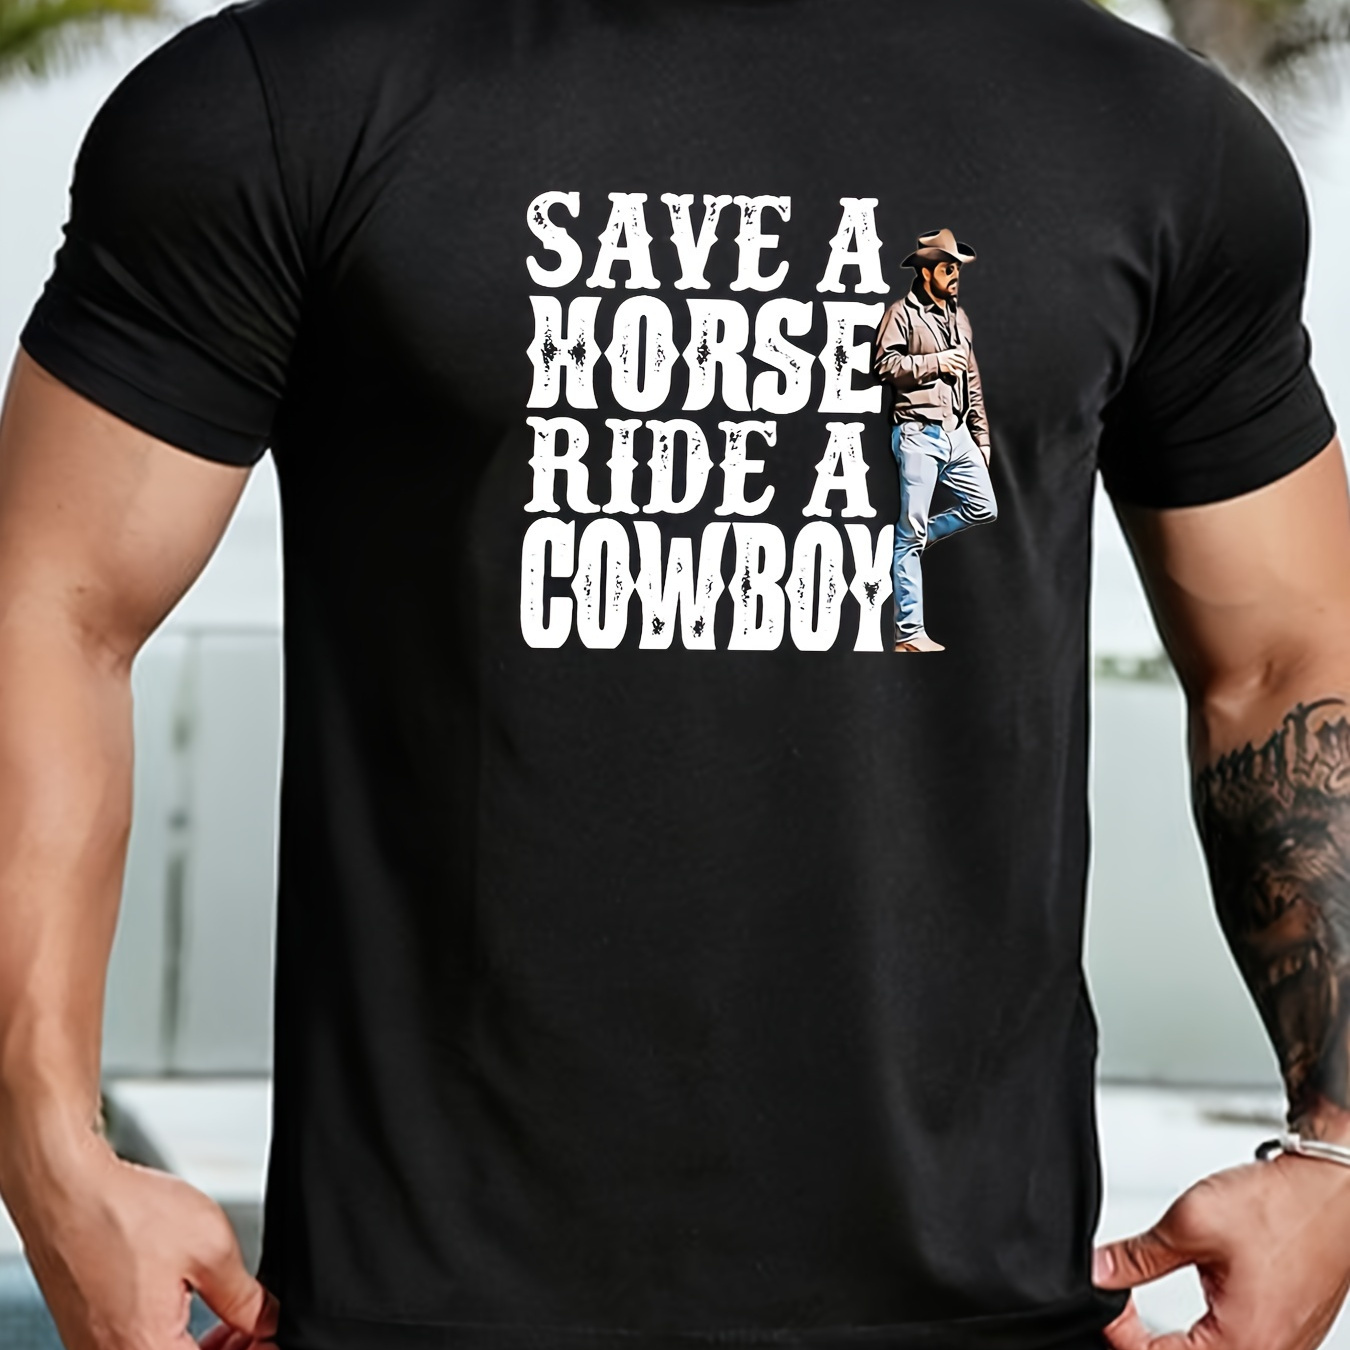 

Save Norse Ride A Cowboy Print, Men's Round Crew Neck Short Sleeve, Simple Style Tee Fashion Regular Fit T-shirt, Casual Comfy Top For Spring Summer Holiday Leisure Vacation Men's Clothing As Gift